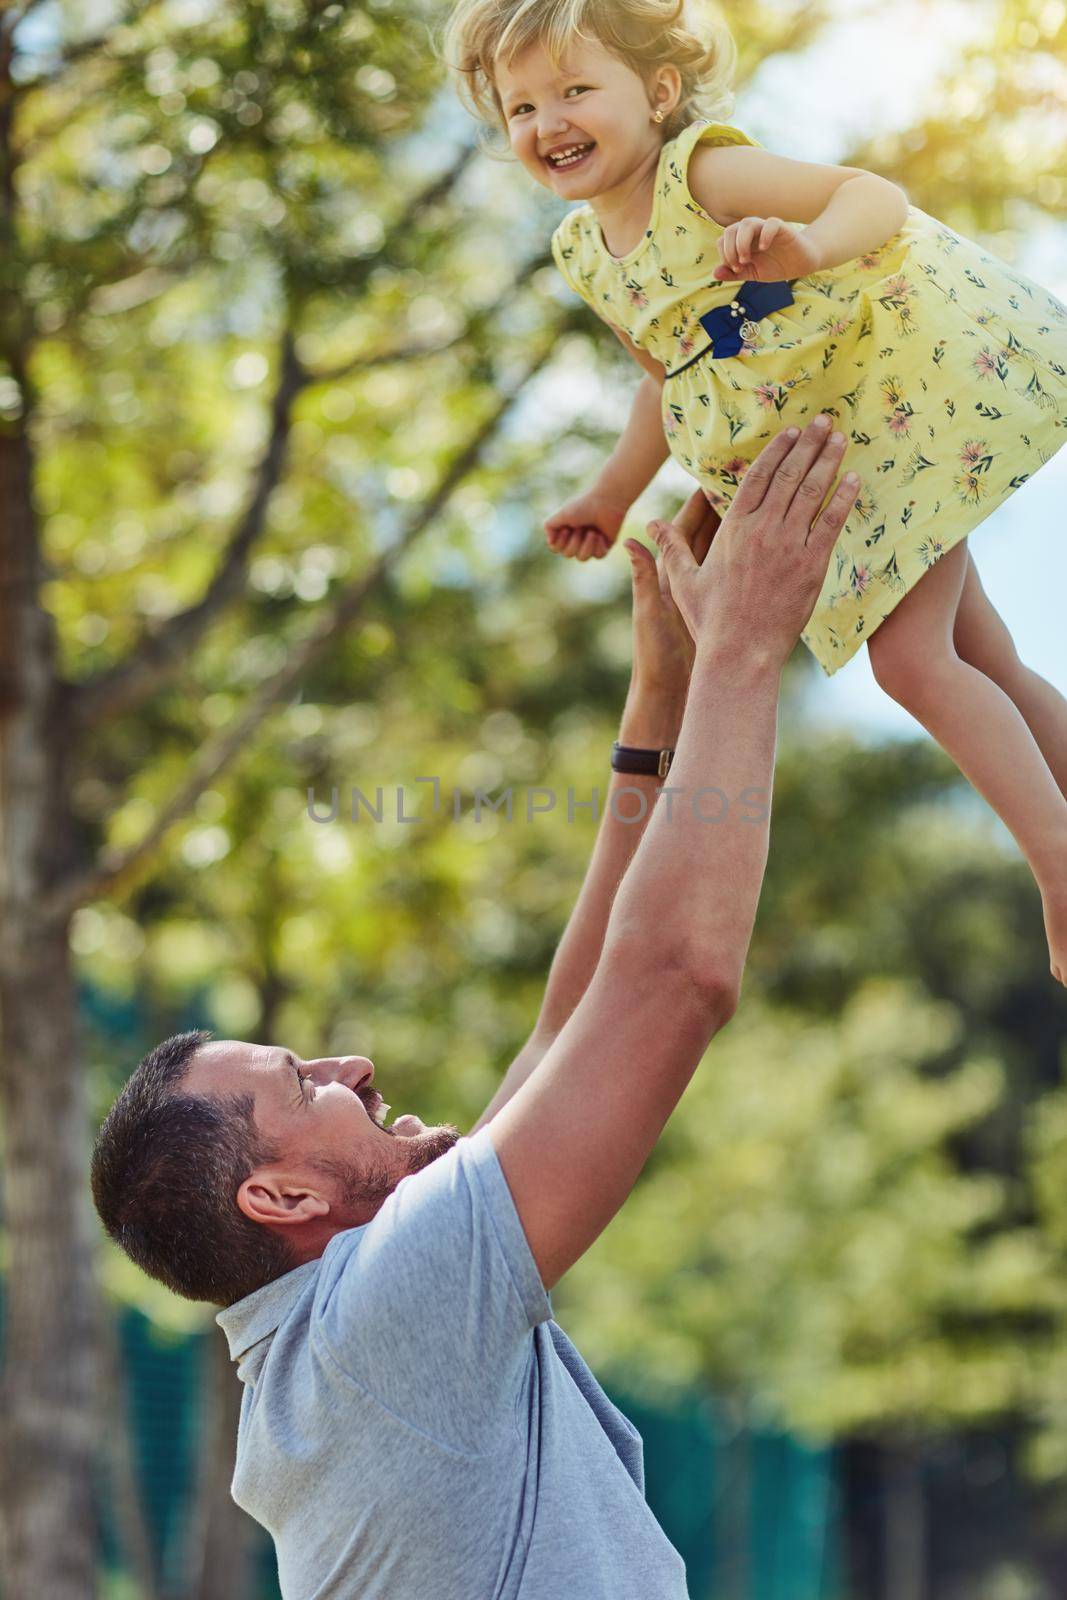 Out for a whole lot of fun. a father bonding with his little daughter outdoors